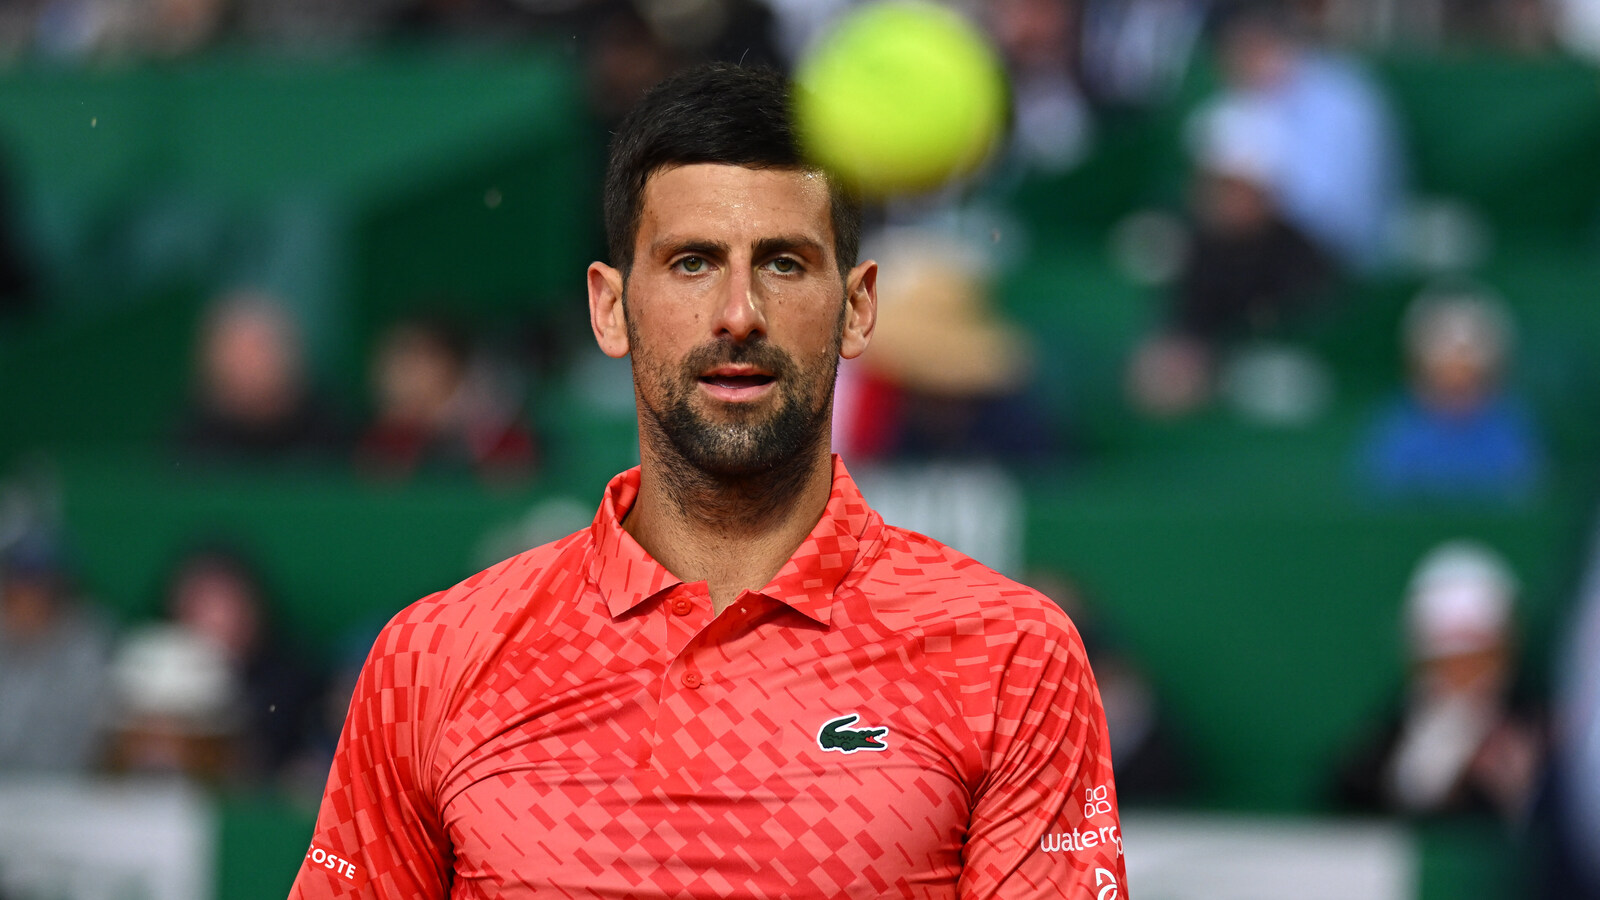 Djokovic Shockingly Crashes Out Of Home Event In Banja Luka